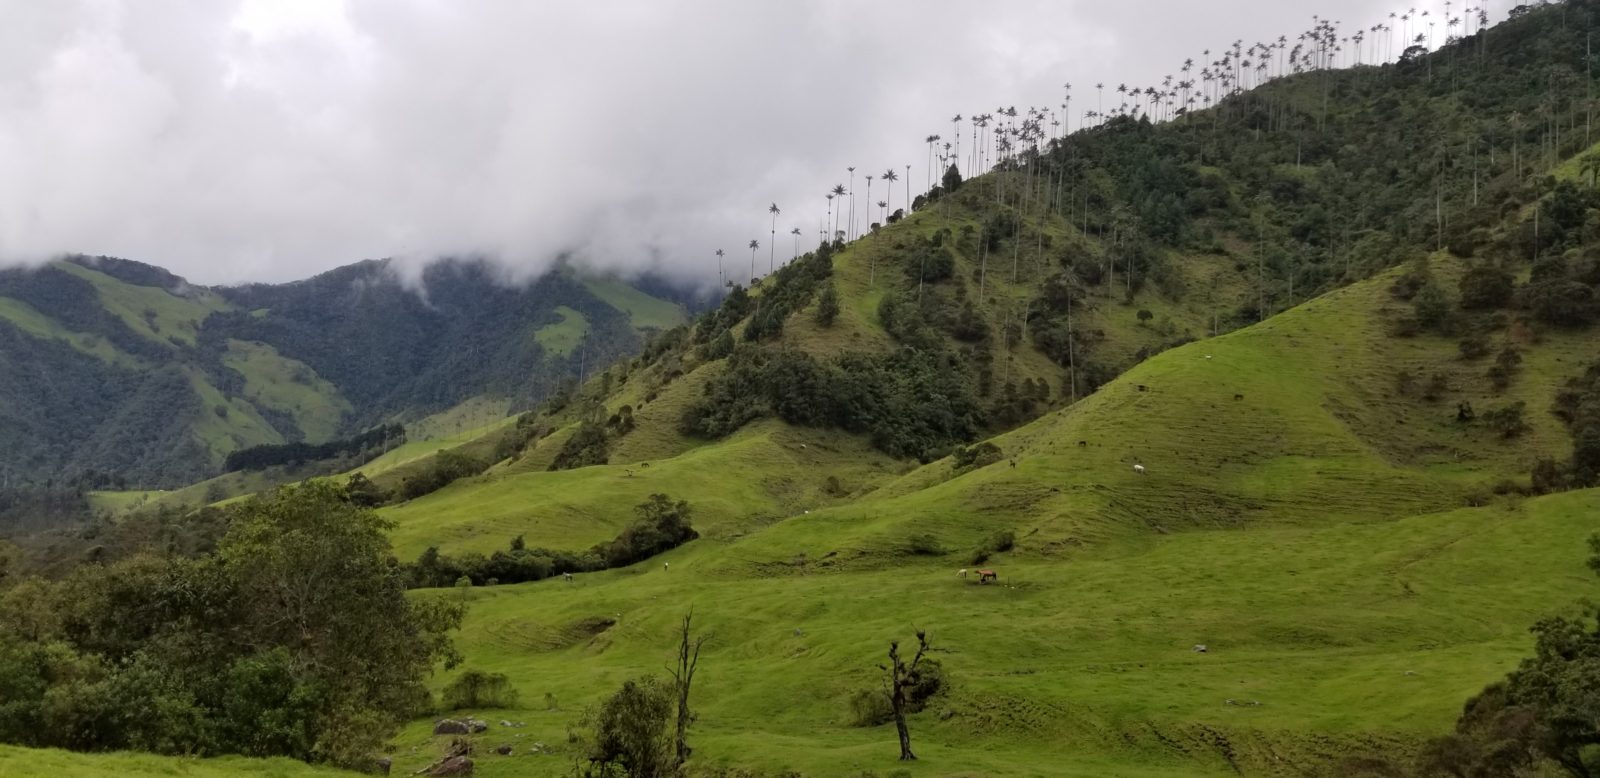 Wide views from bottom of Valle de Cocora